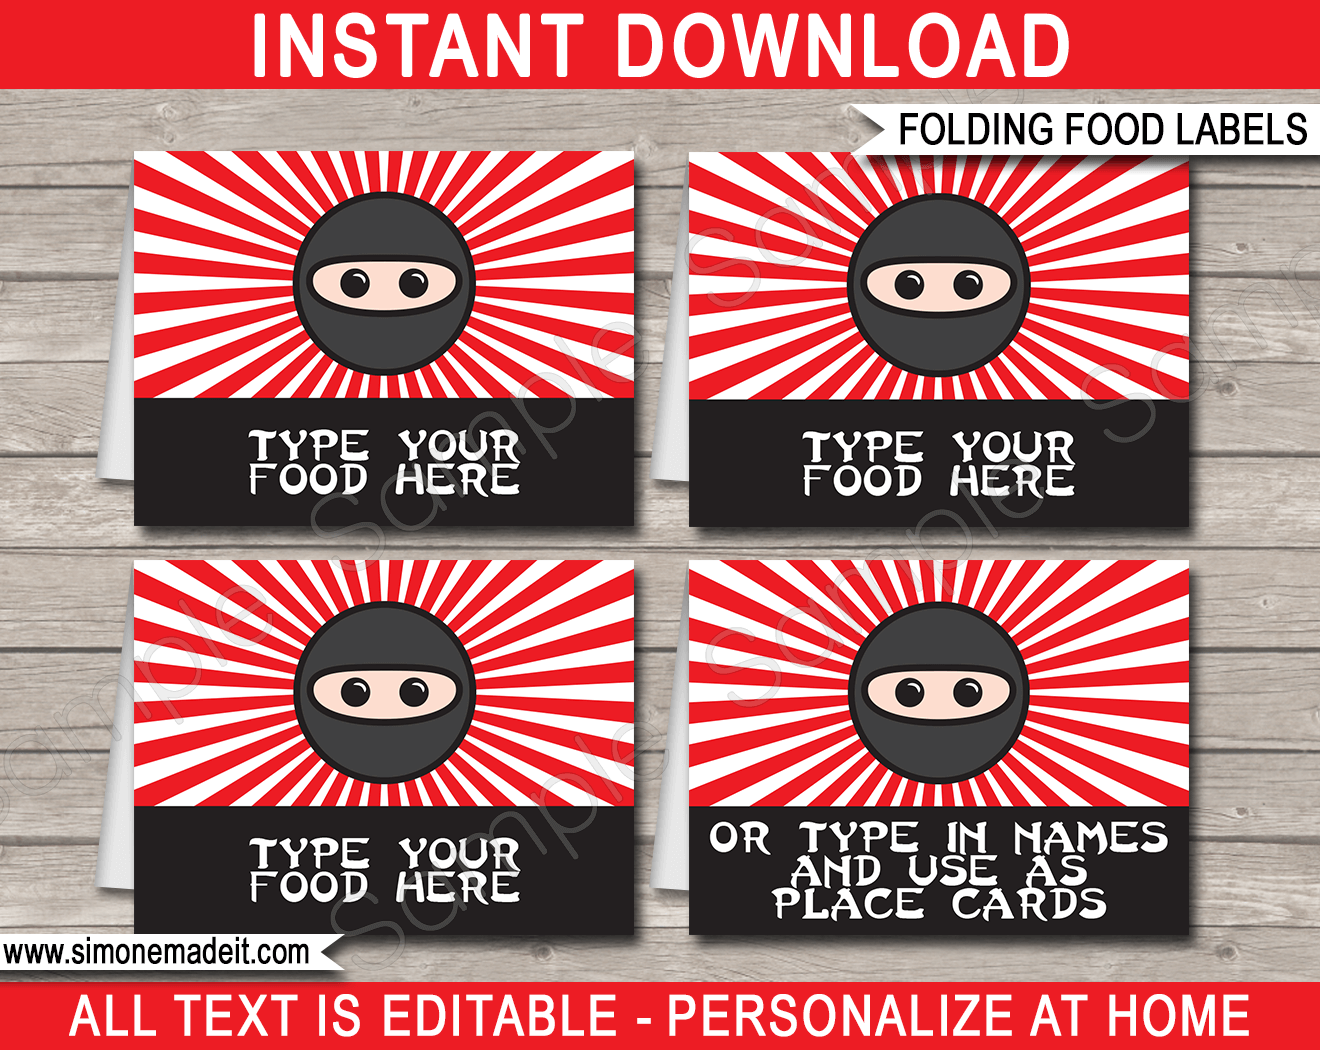 Ninja Party Food Labels | Food Buffet Tags | Place Cards | Ninja Birthday Party Theme | Editable DIY Template | $3.00 INSTANT DOWNLOAD via SIMONEmadeit.com